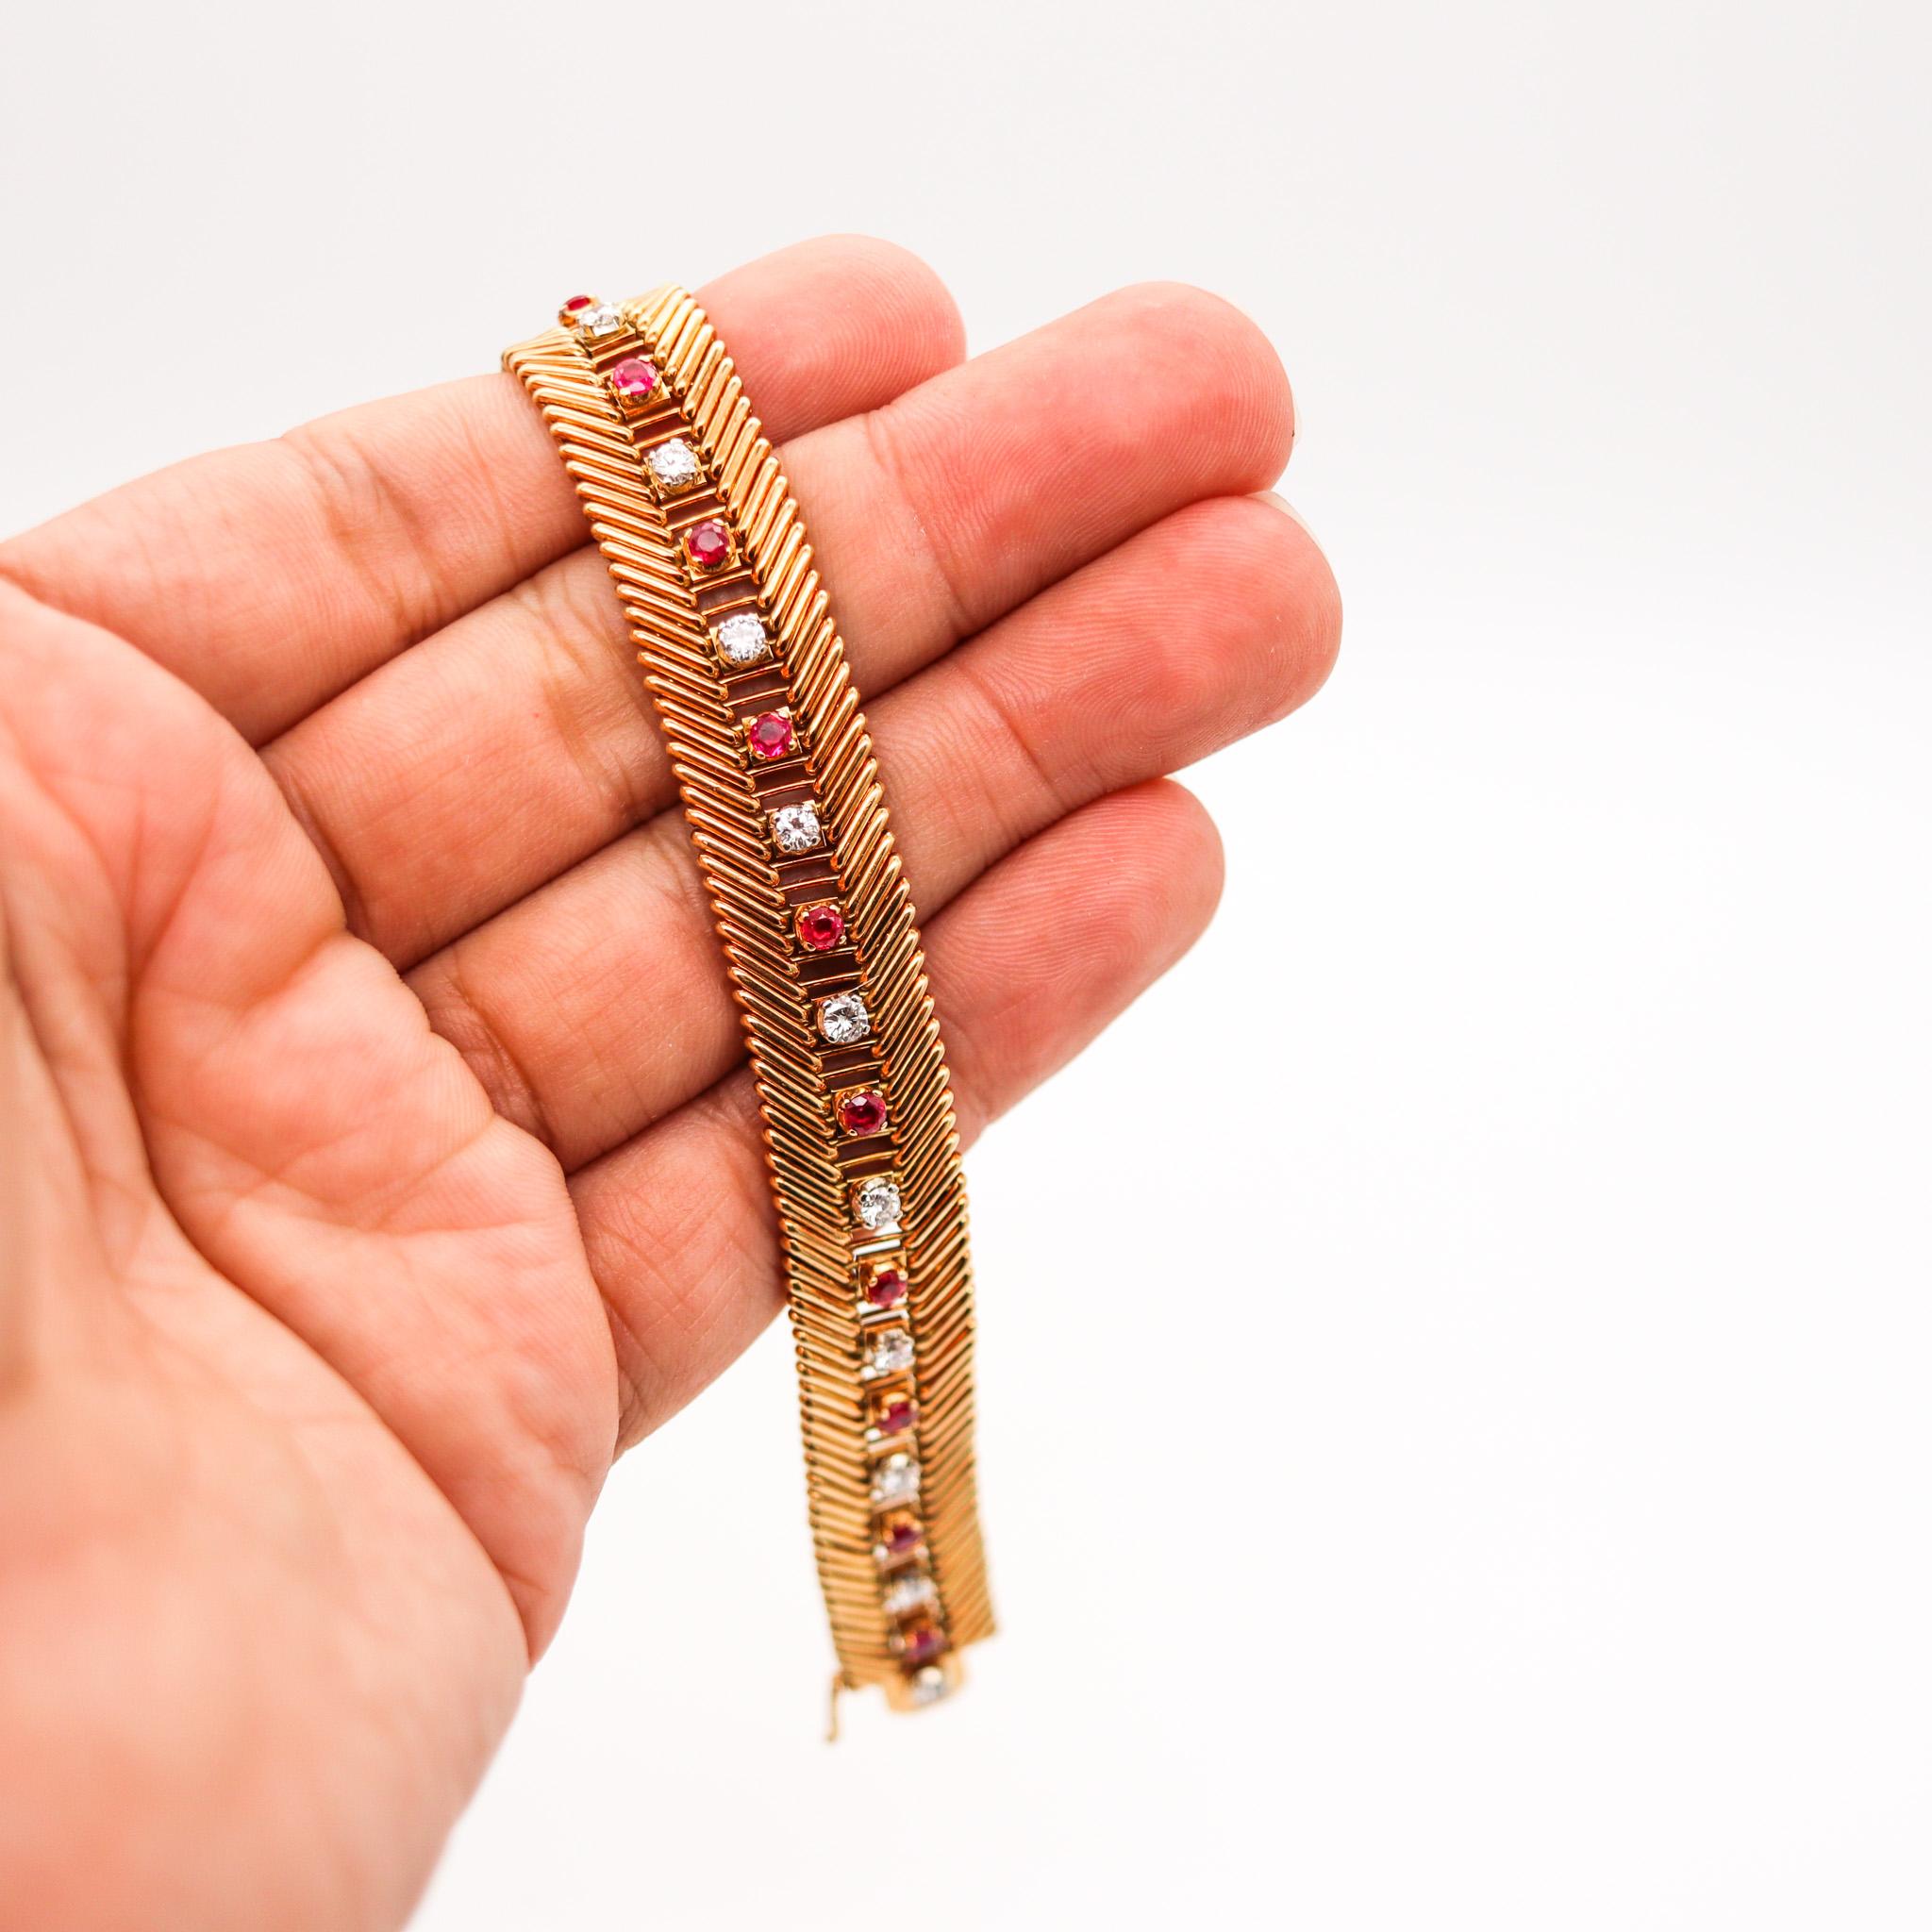 Bvlgari Milano 1950 Bracelet in 18kt Gold with 5.42ctw in Rubies and Diamonds In Excellent Condition For Sale In Miami, FL